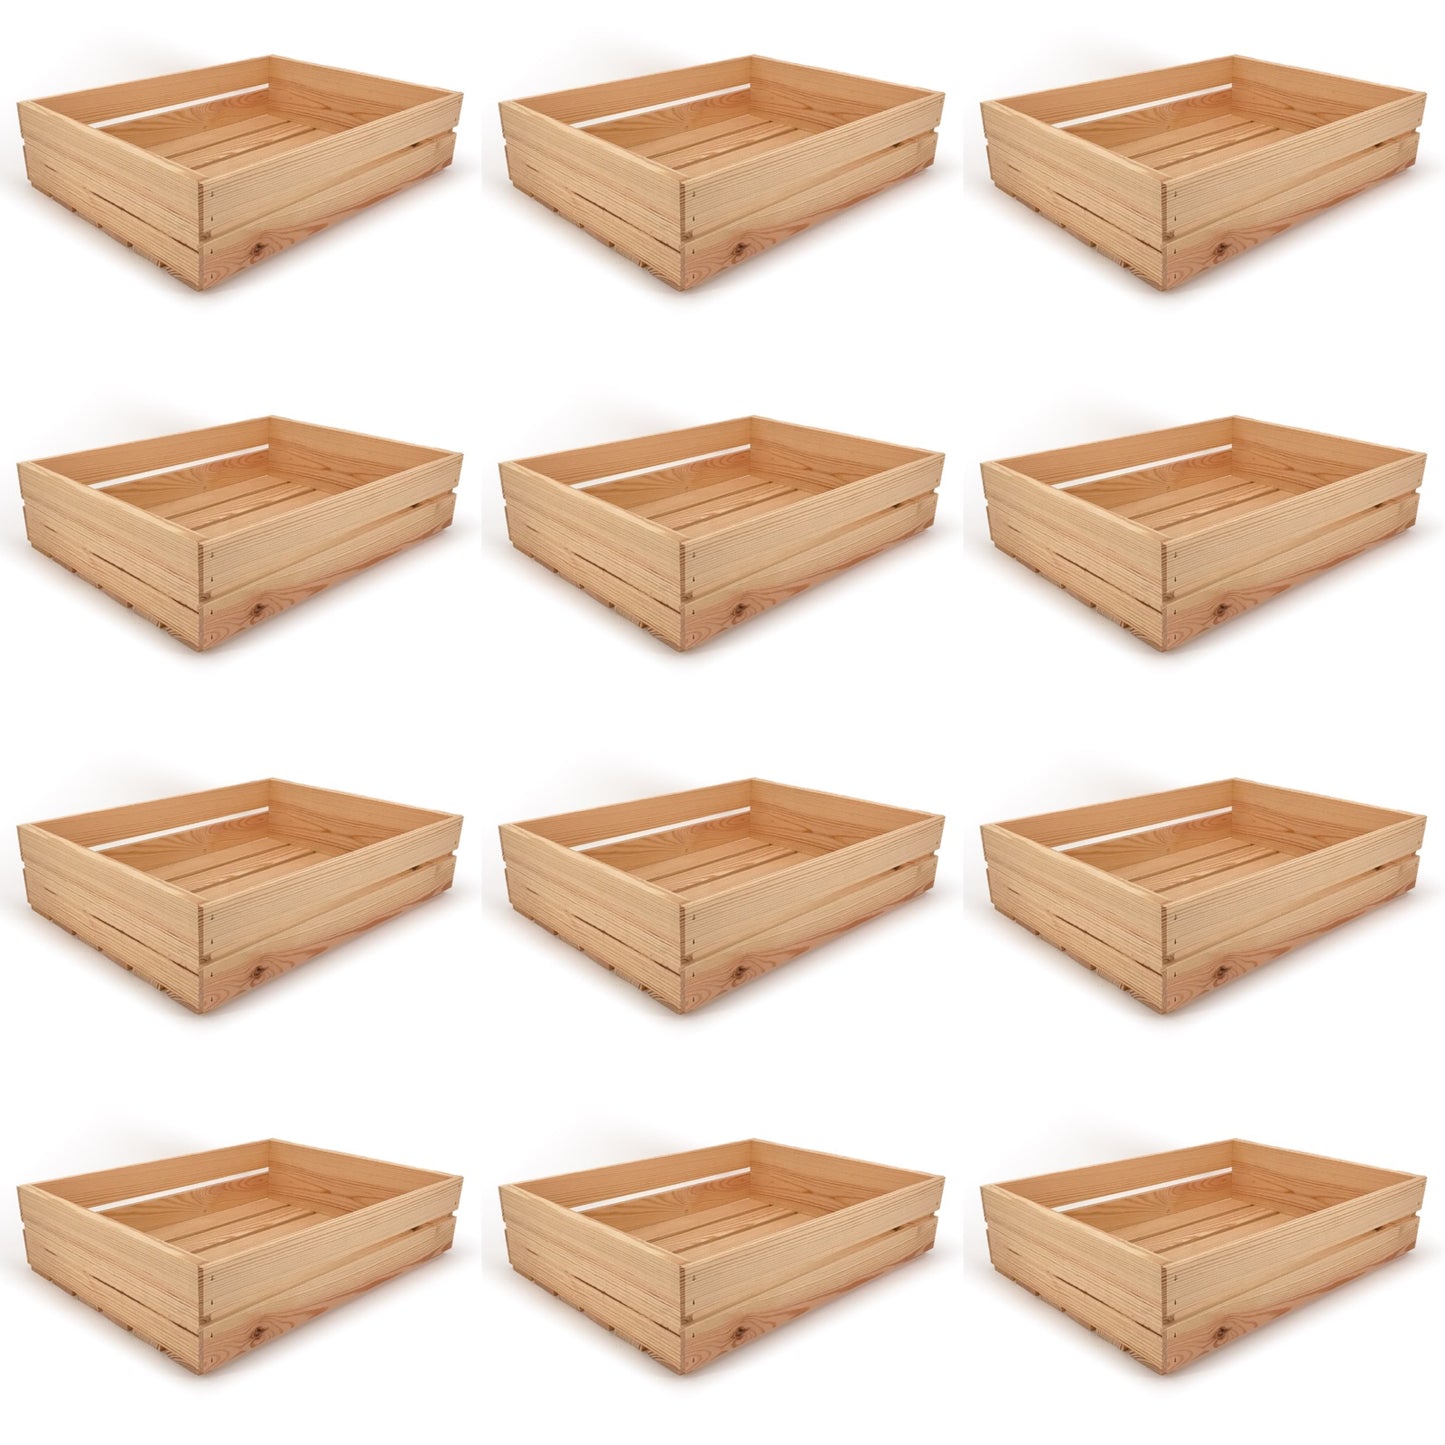 12 Small wooden crates 22x17x5.25, 6-WS-22-17-5.25-NX-NW-NL, 12-WS-22-17-5.25-NX-NW-NL, 24-WS-22-17-5.25-NX-NW-NL, 48-WS-22-17-5.25-NX-NW-NL, 96-WS-22-17-5.25-NX-NW-NL